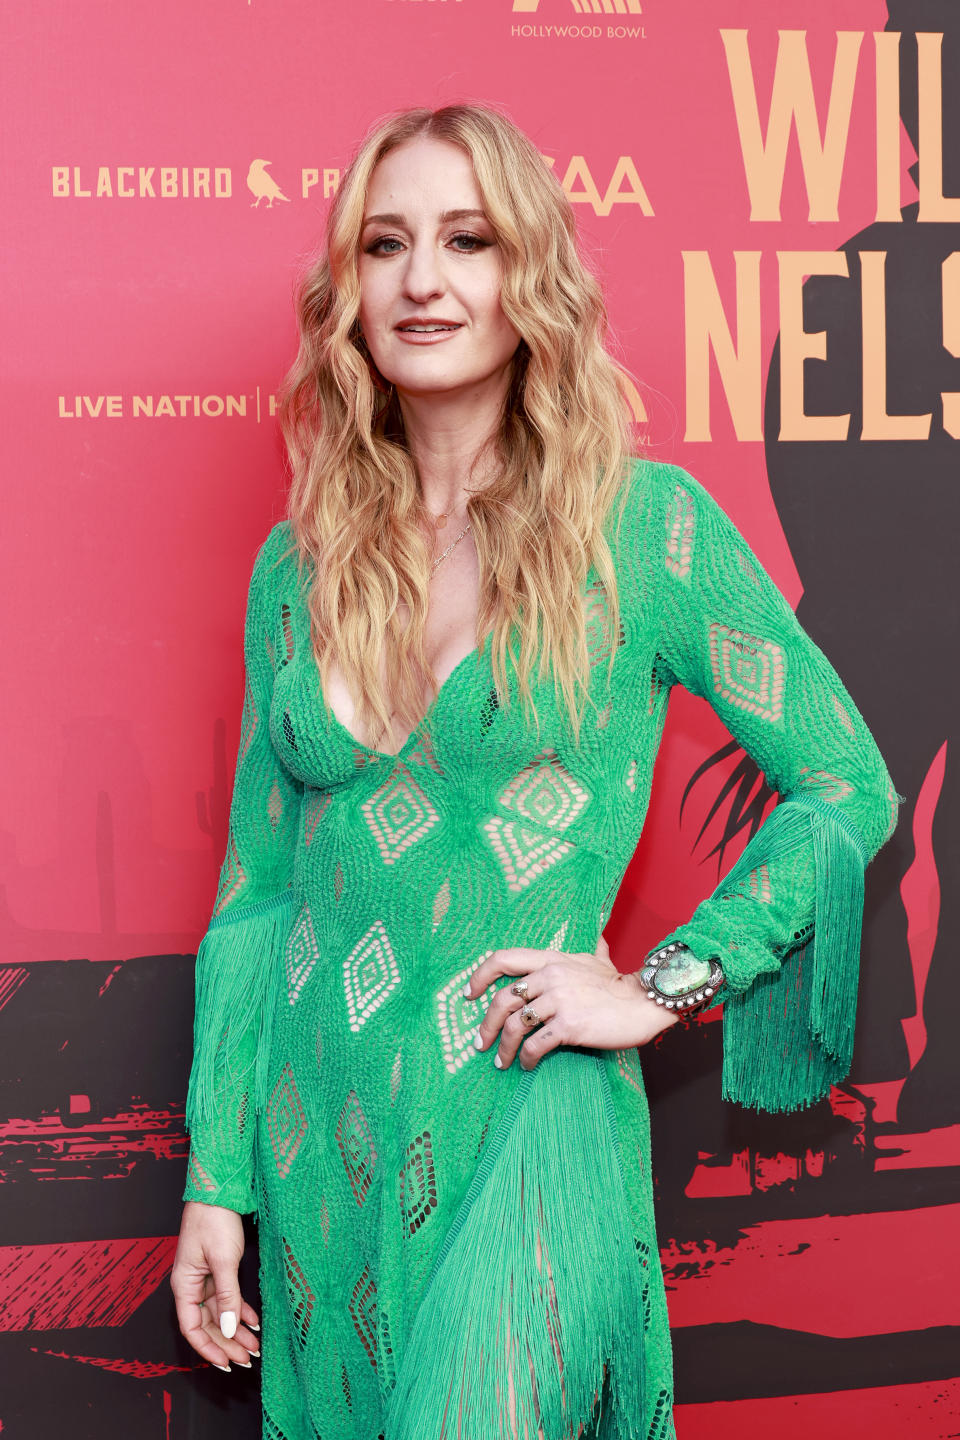 Woman in a green dress with fringe details posing on the red carpet